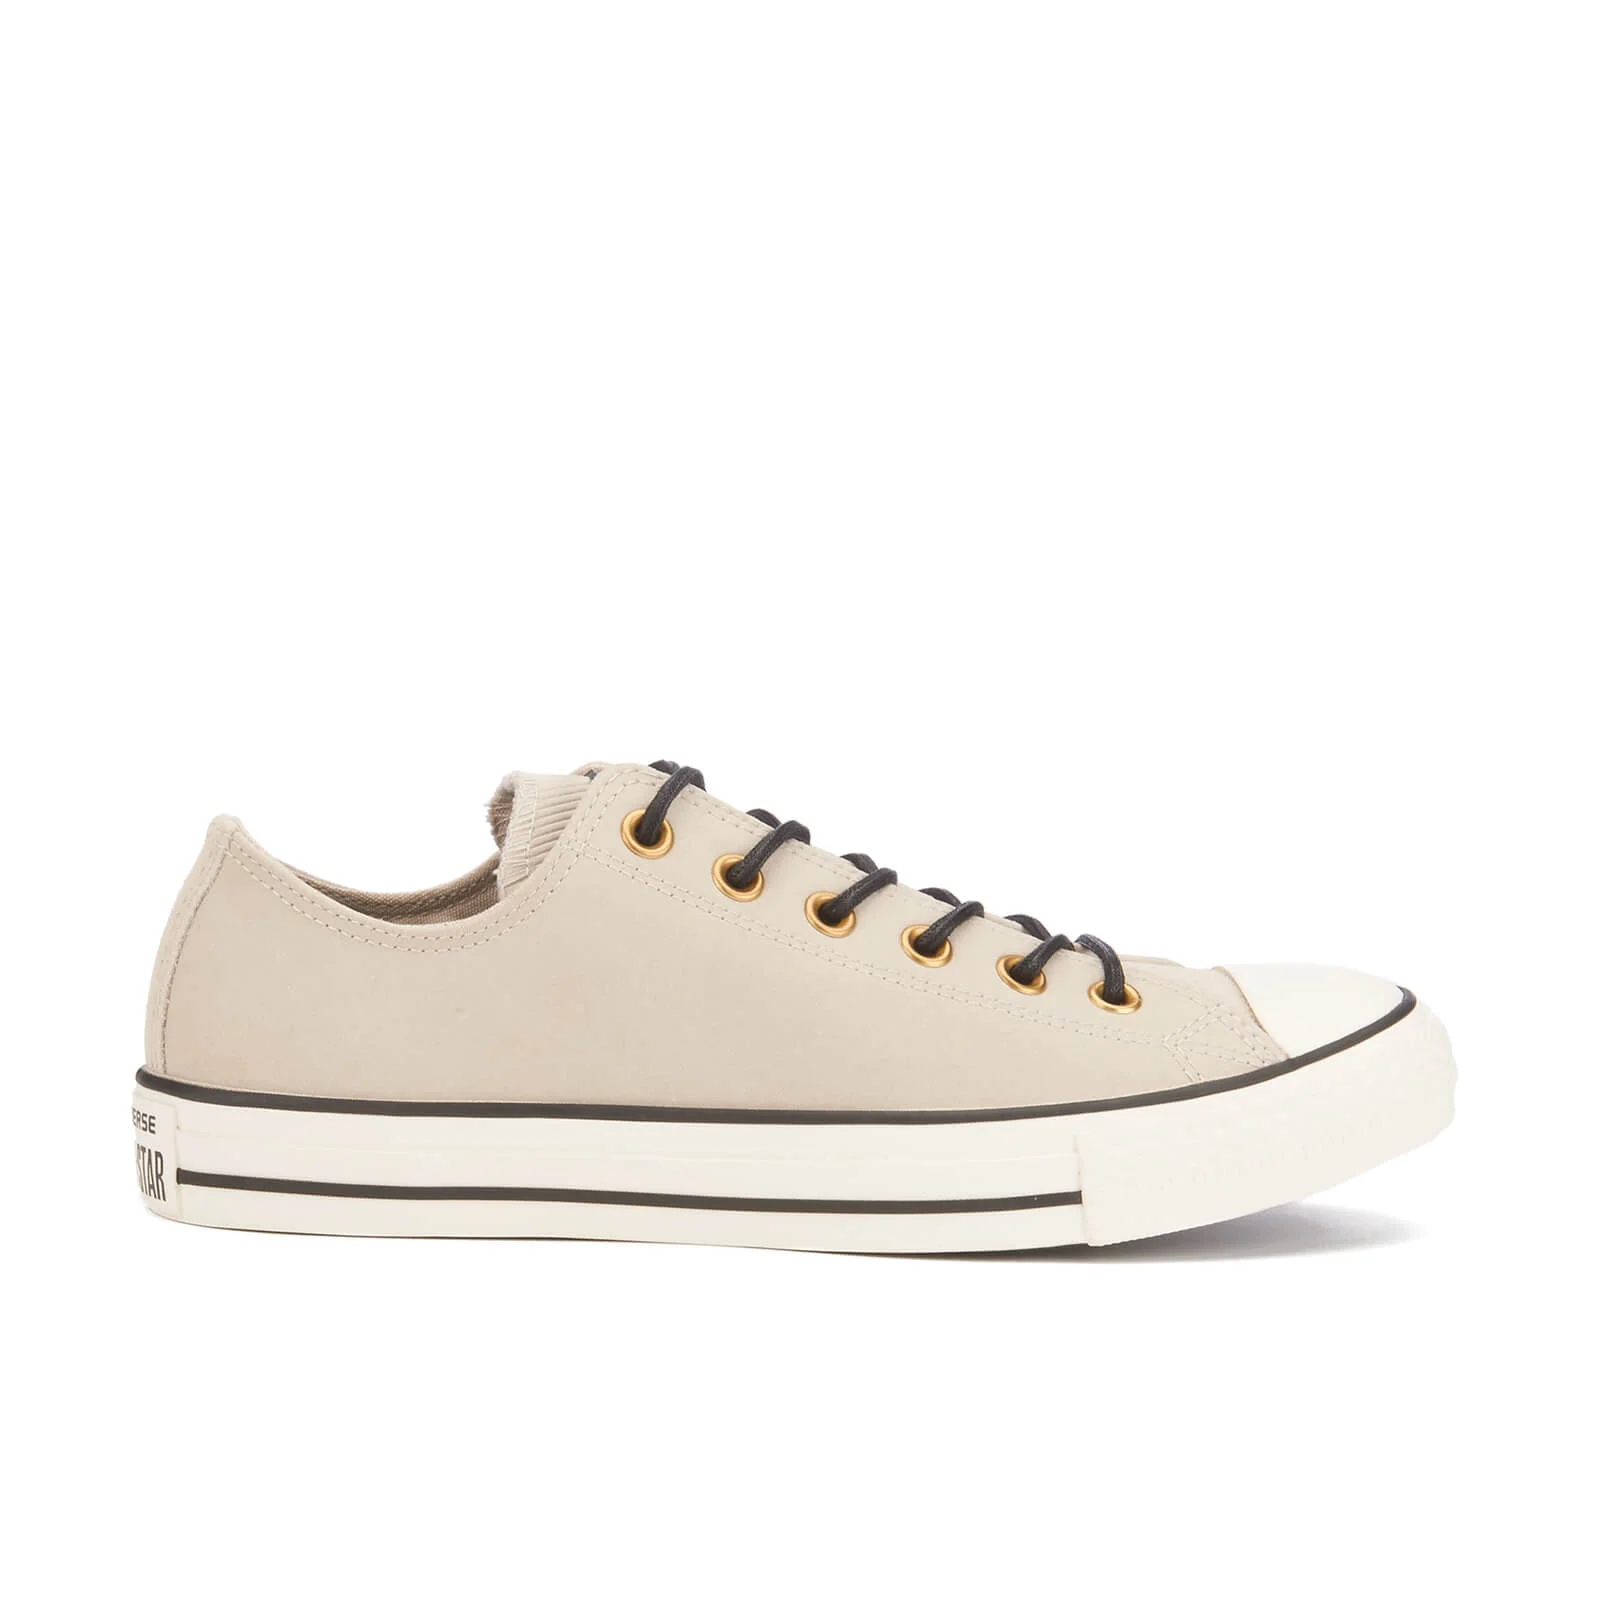 Converse Men's Chuck Taylor All Star Leather/Corduroy Ox Trainers - Frayed Burlap/Egret/Black Image 1